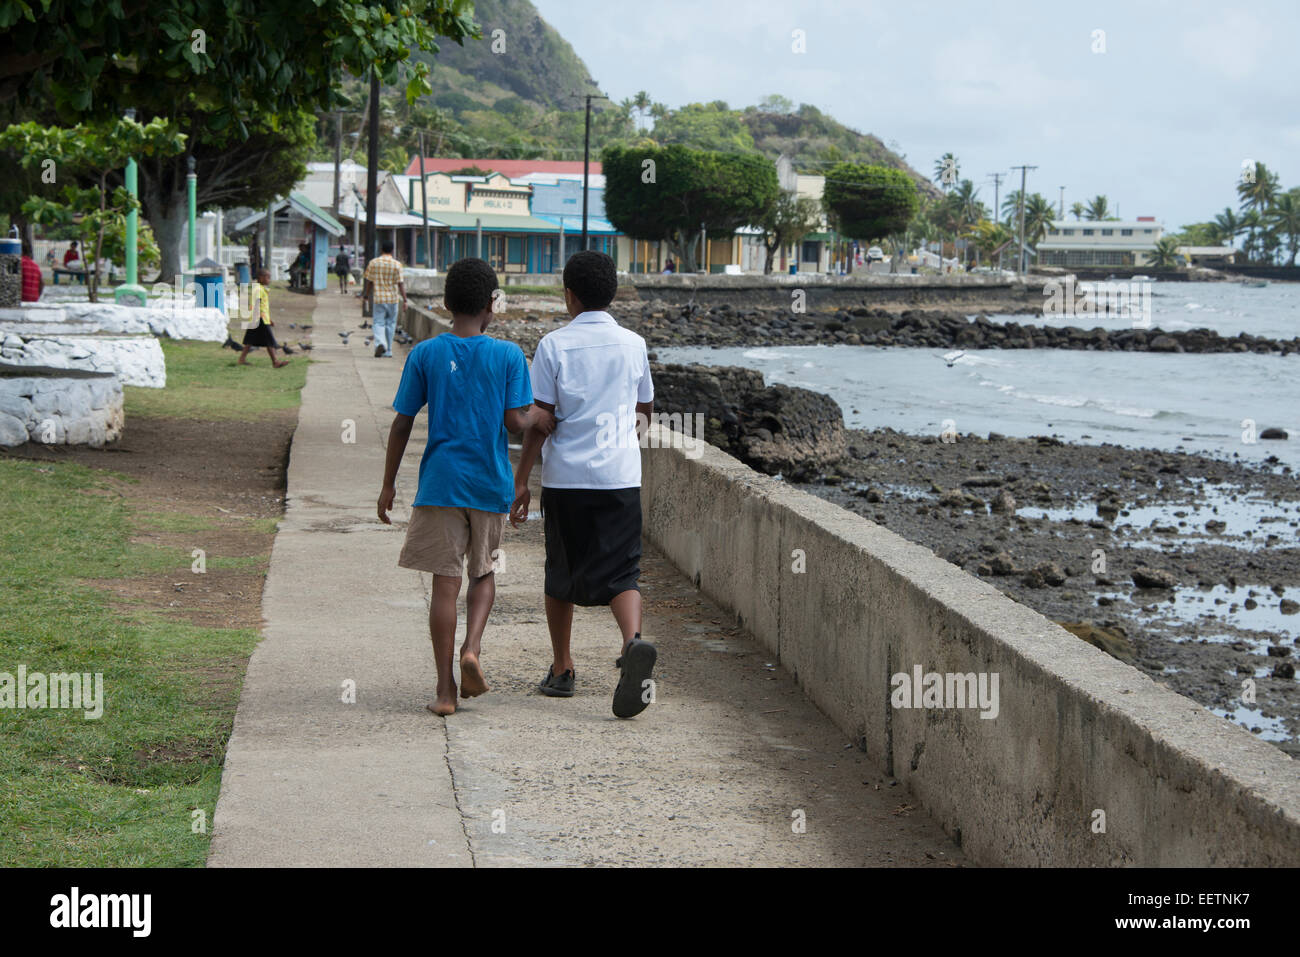 Fiji, Island of Ovalua, port town of Levuka. First Colonial settlement and first capital of Fiji in 1874. Stock Photo